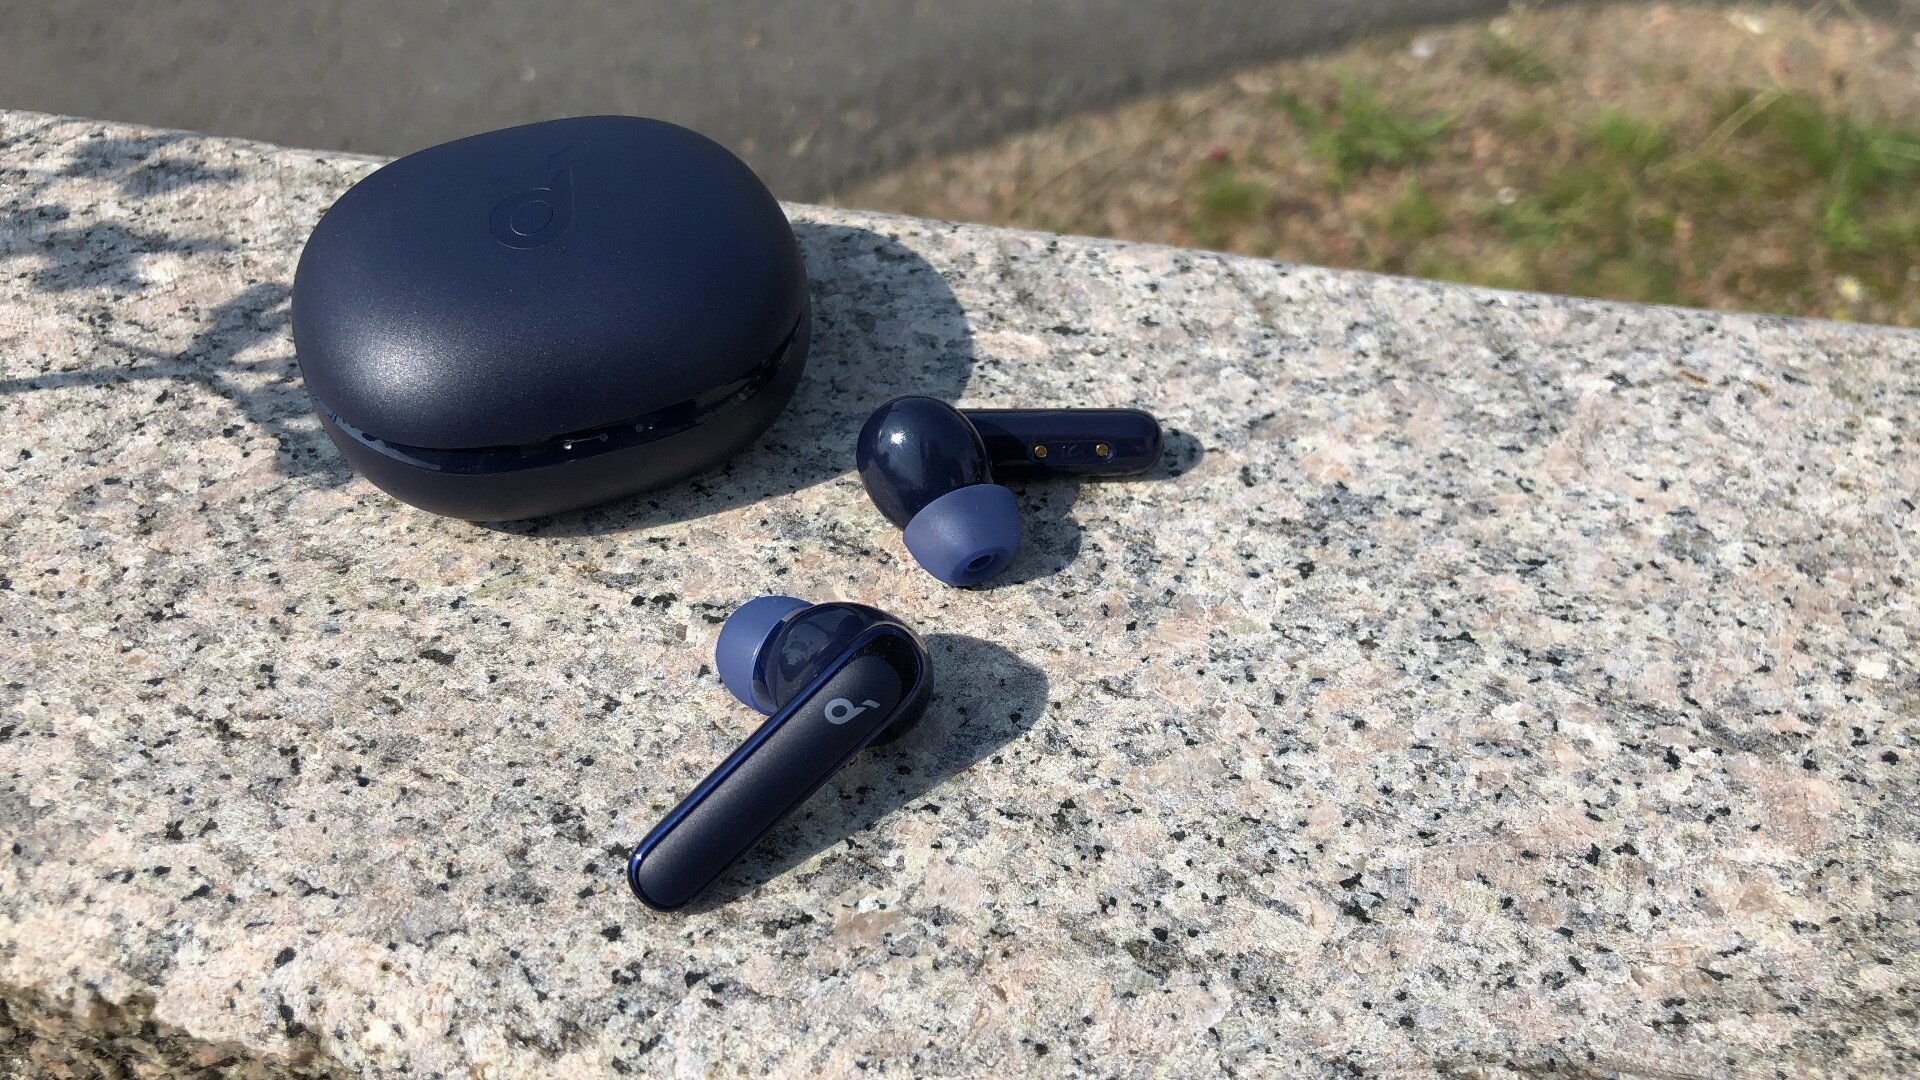 Soundcore Life P3 review: Better than Liberty Air 2 Pro?